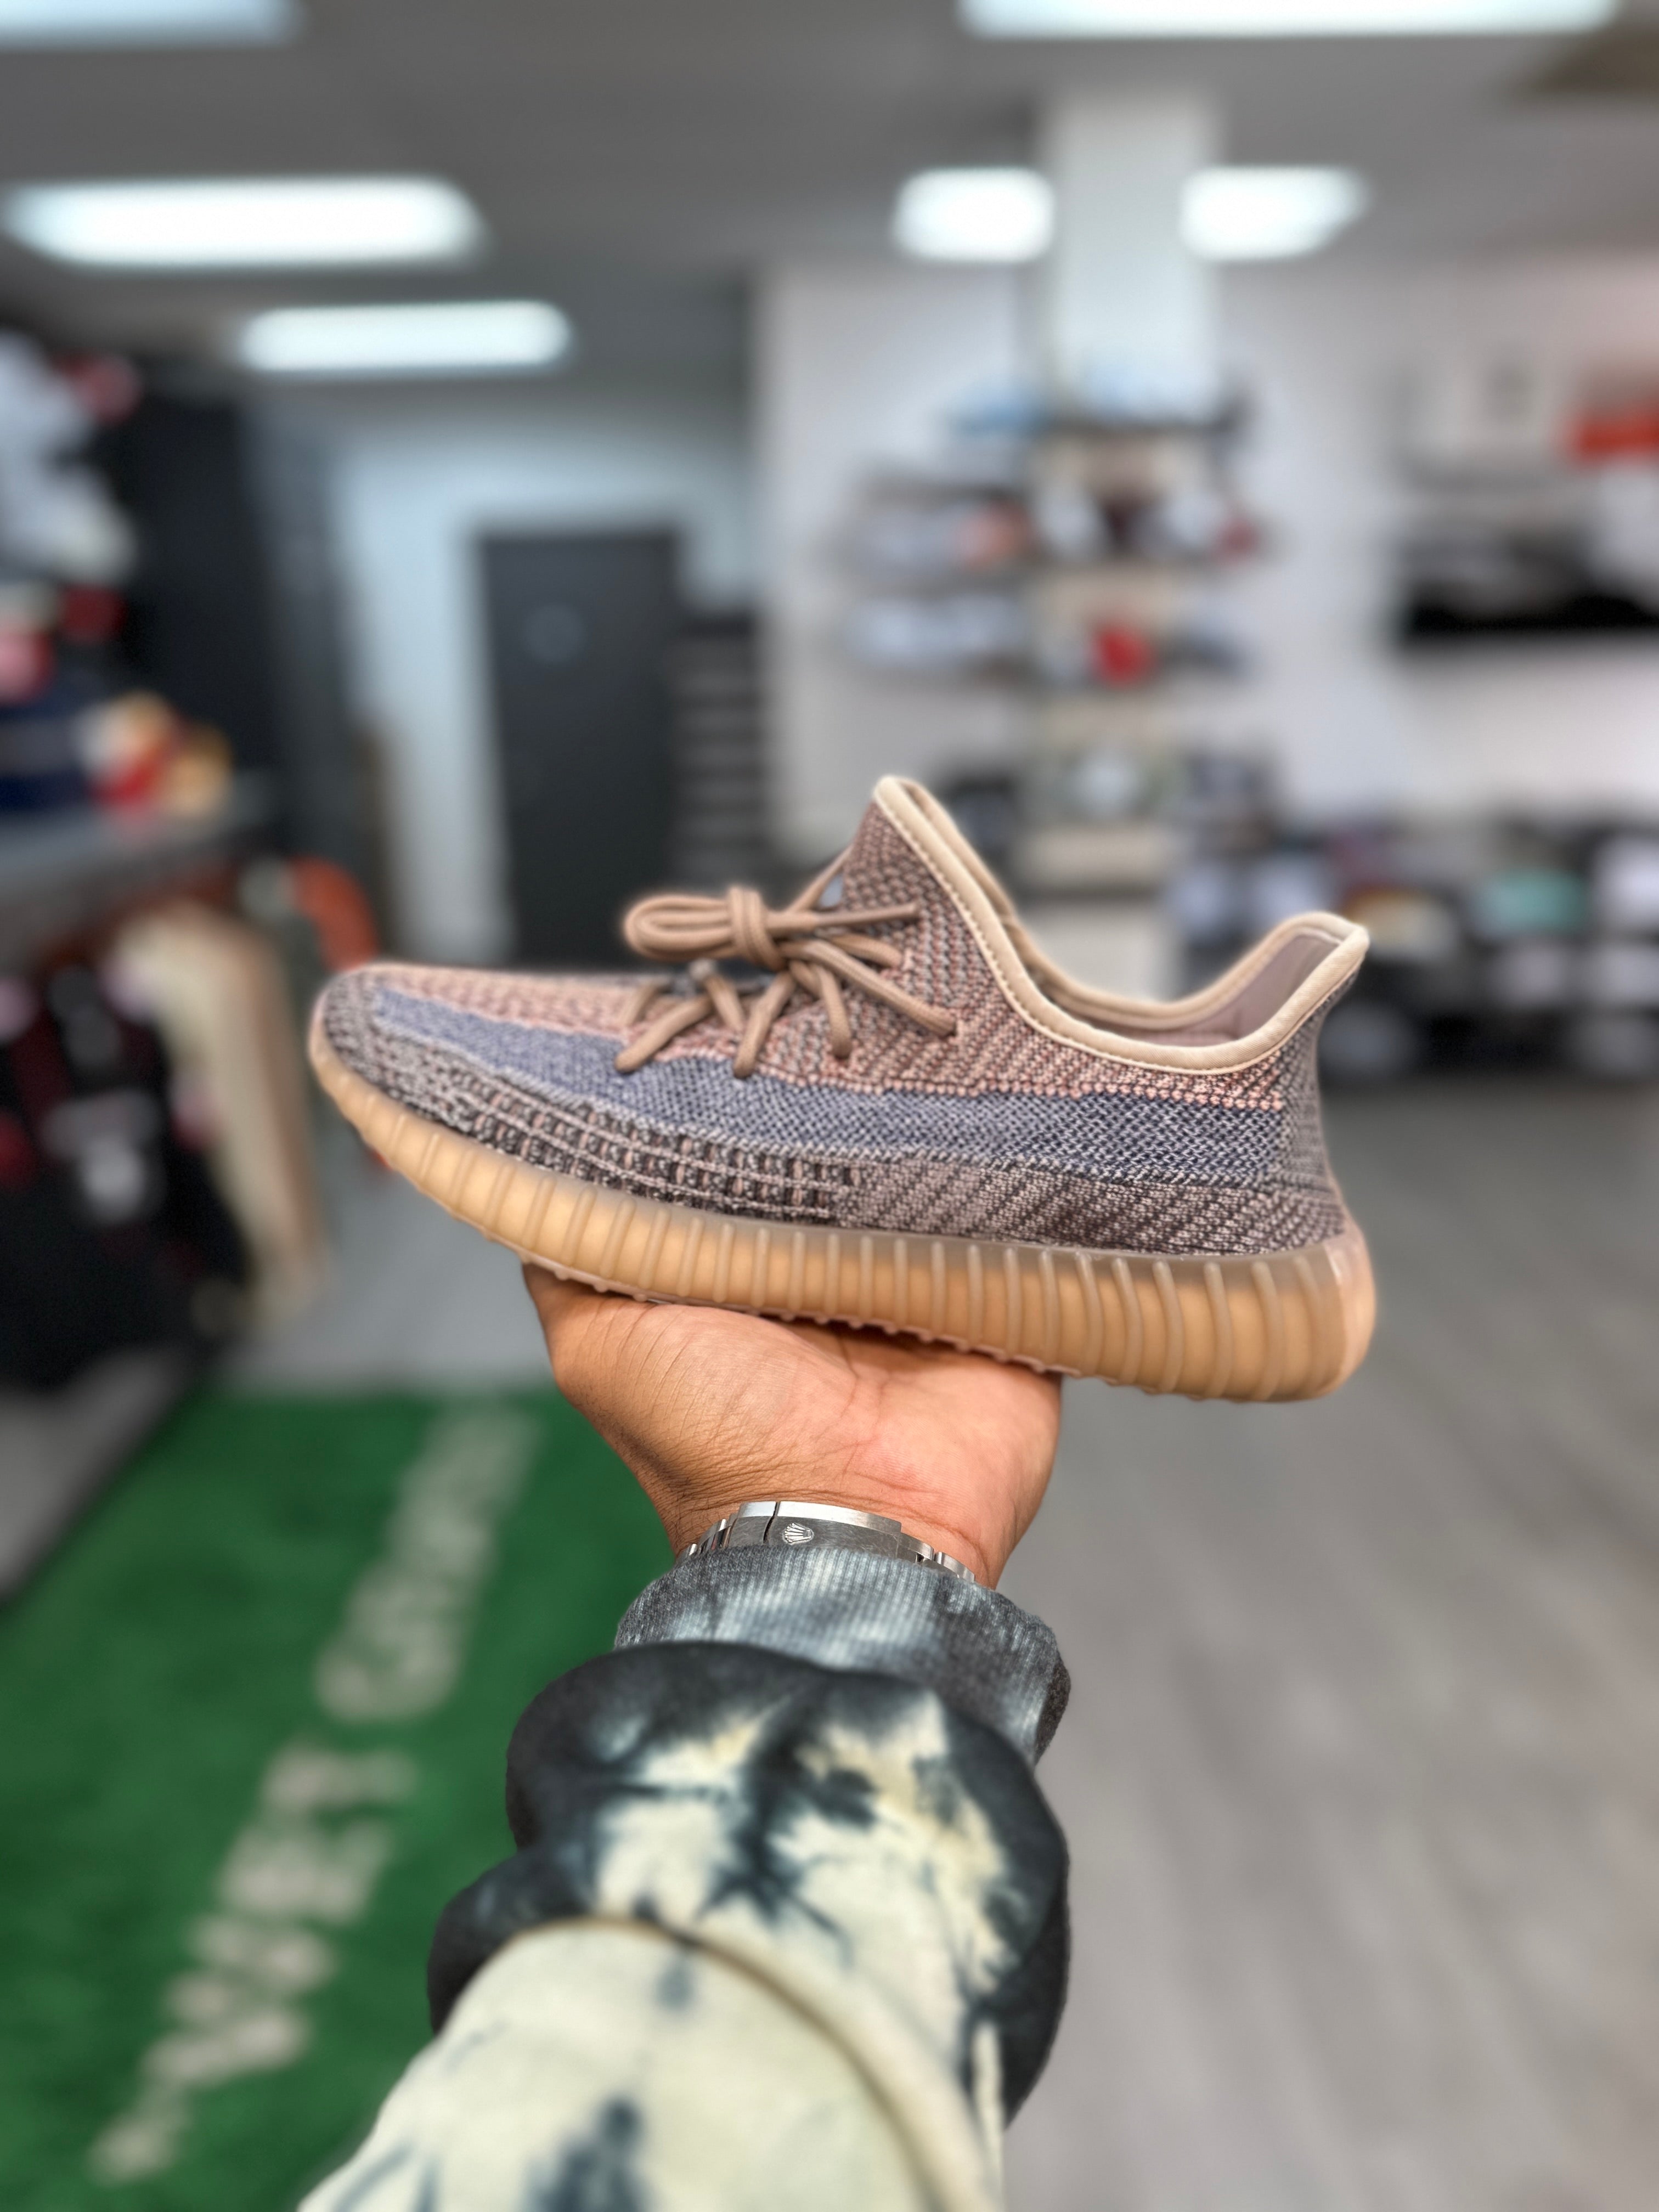 Fade Adidas Yeezy Boost 350 V2 - Luxuries By Luck